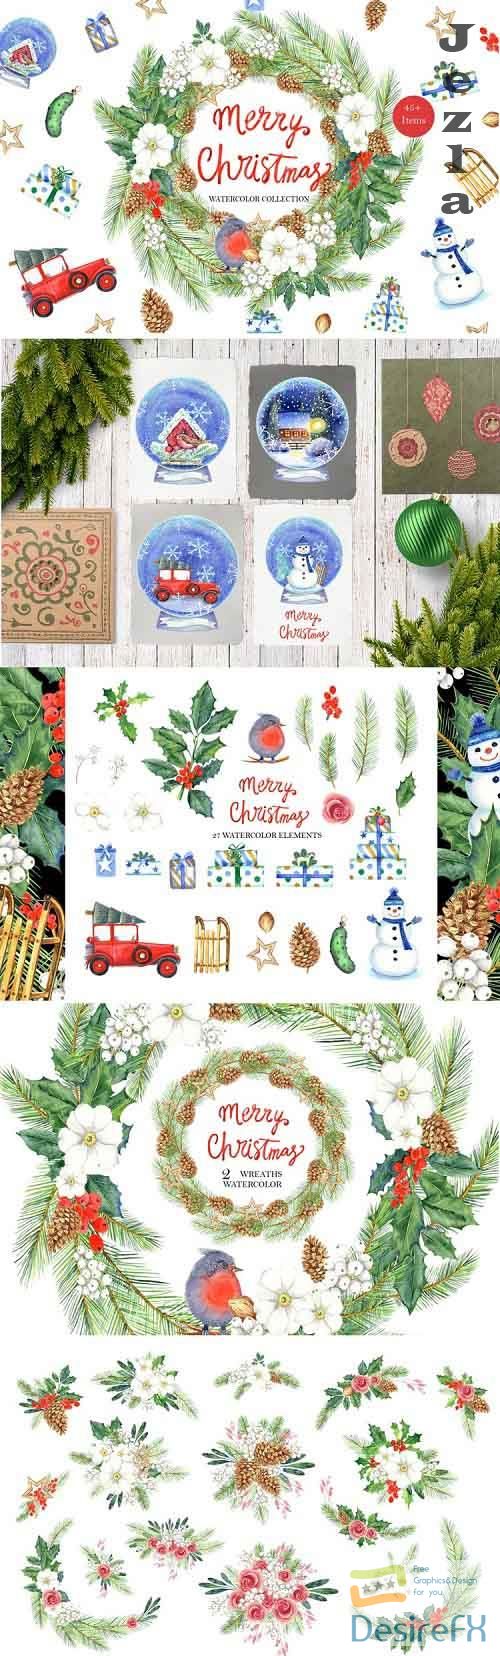 Merry Christmas watercolor collection - 1016722